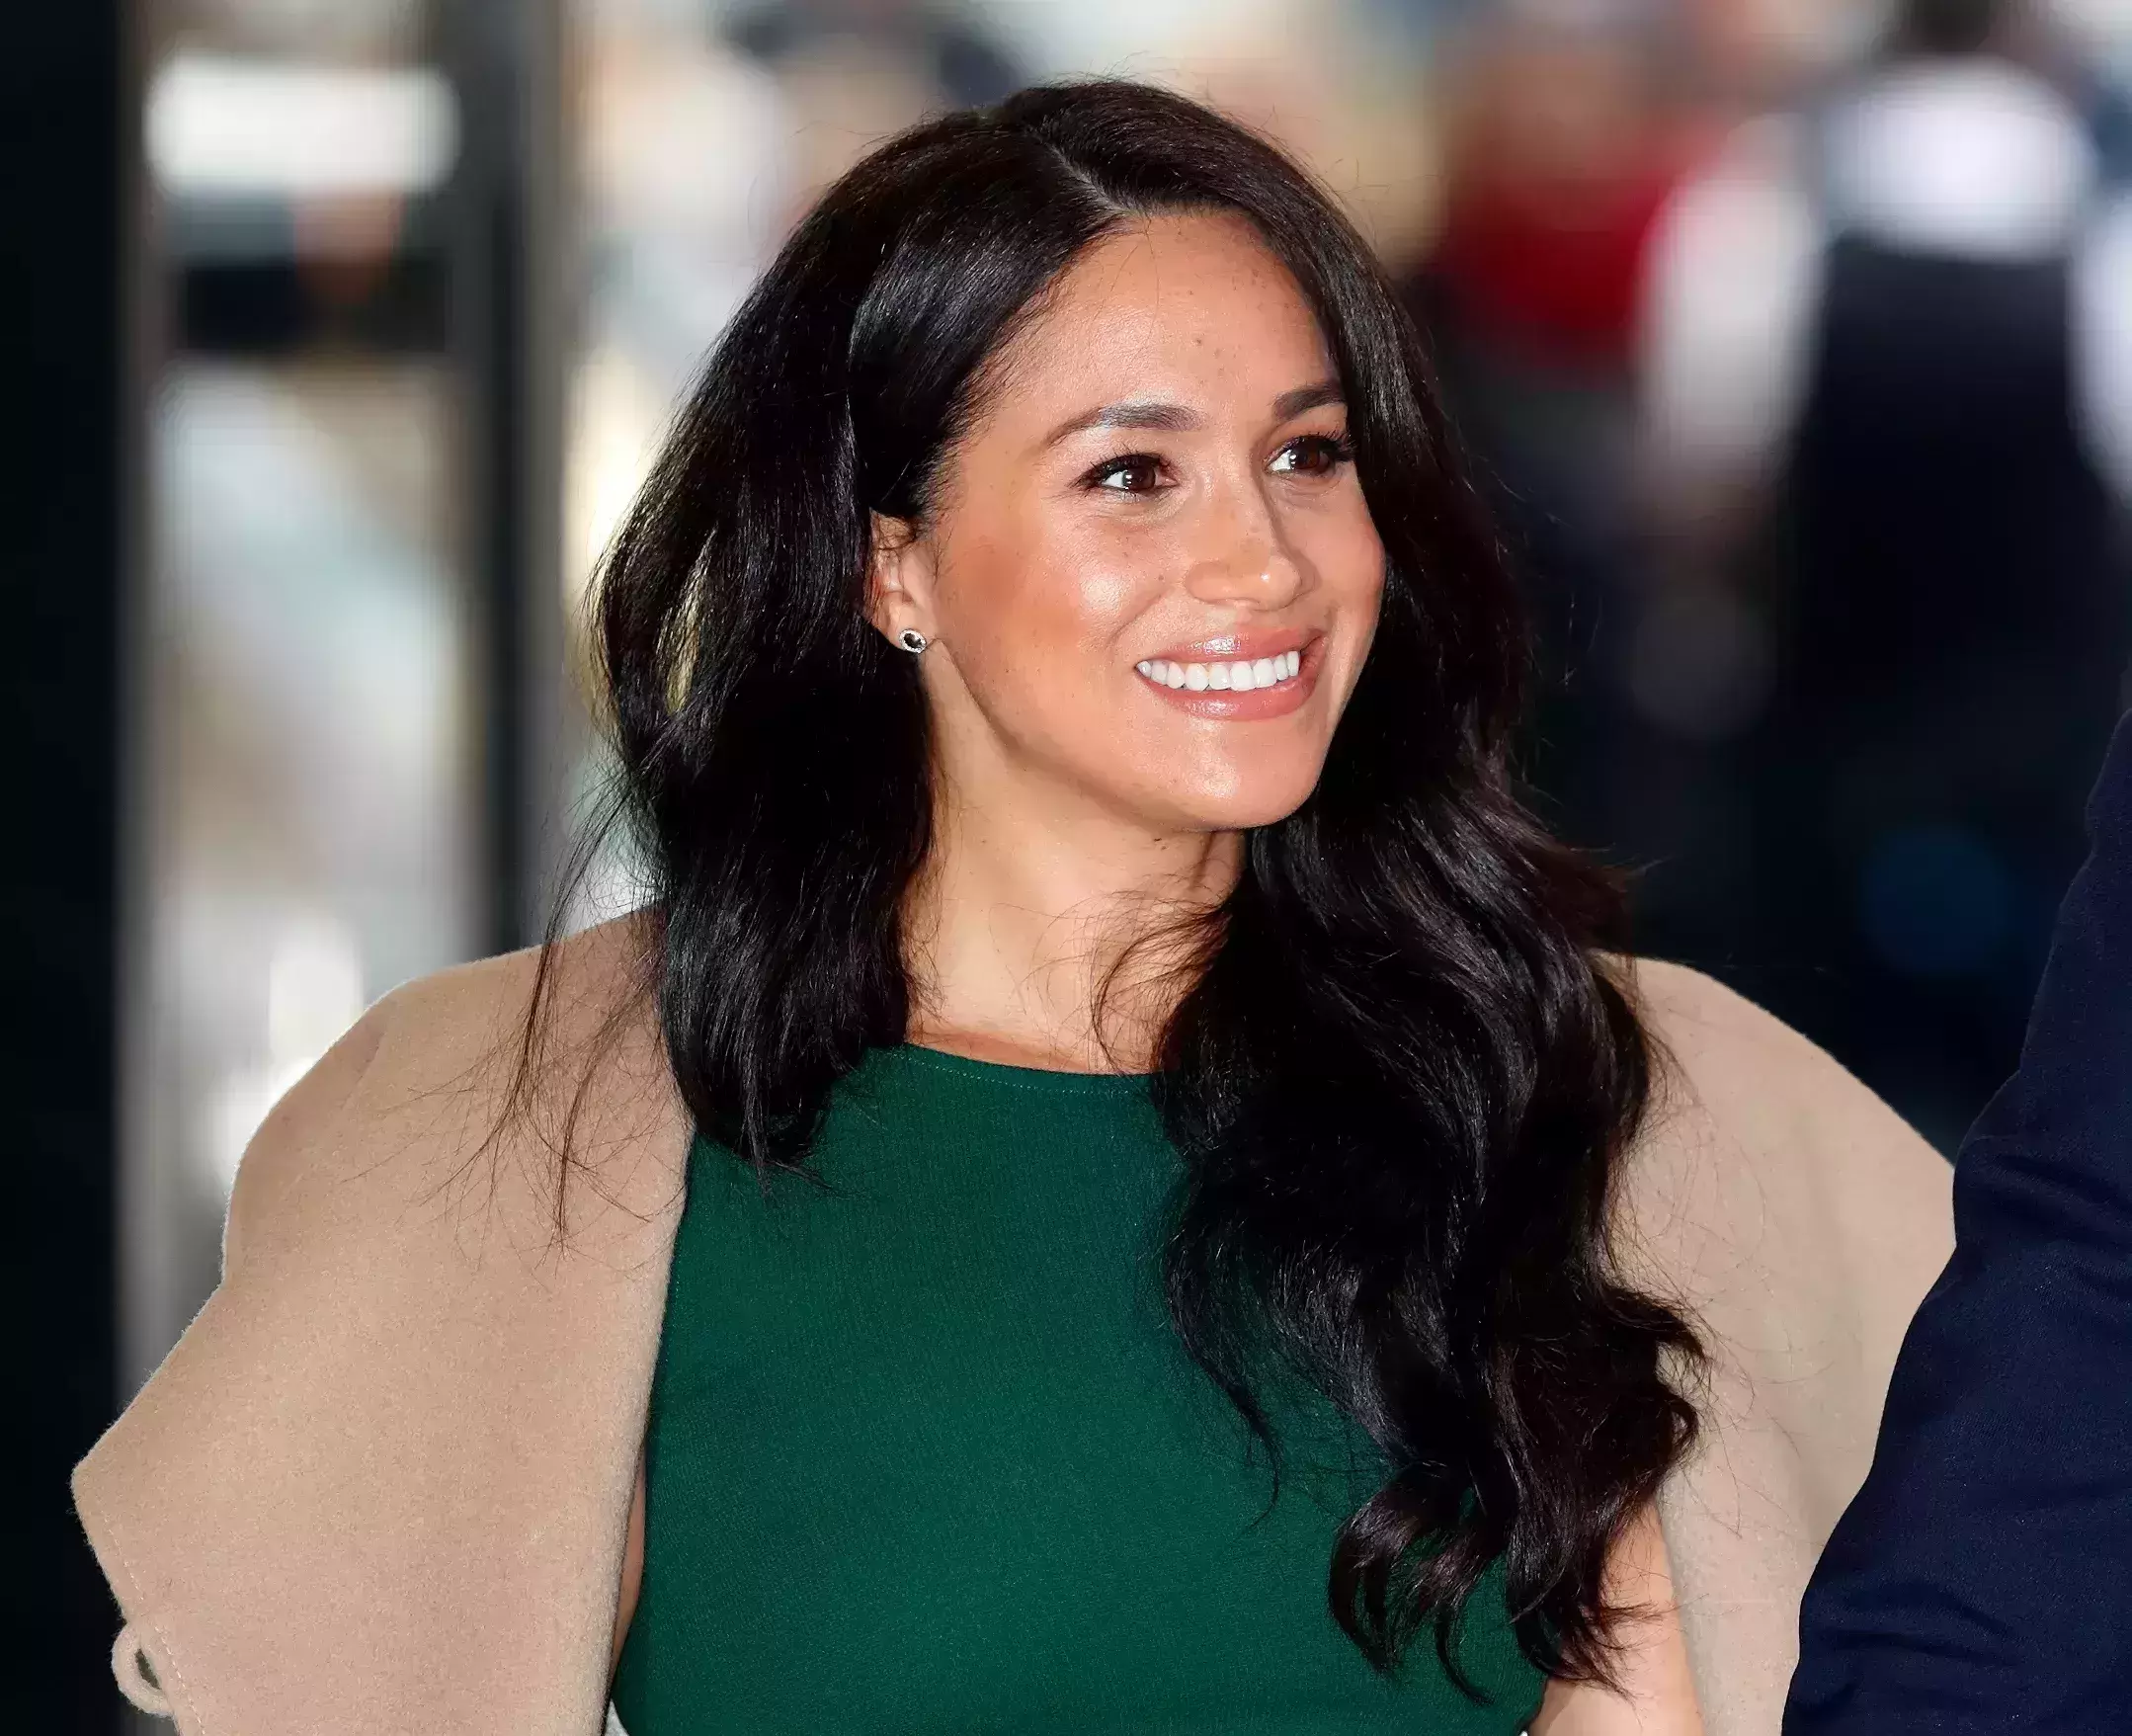 Meghan Markle launches Spotify podcast, Serena Williams stars in first episode